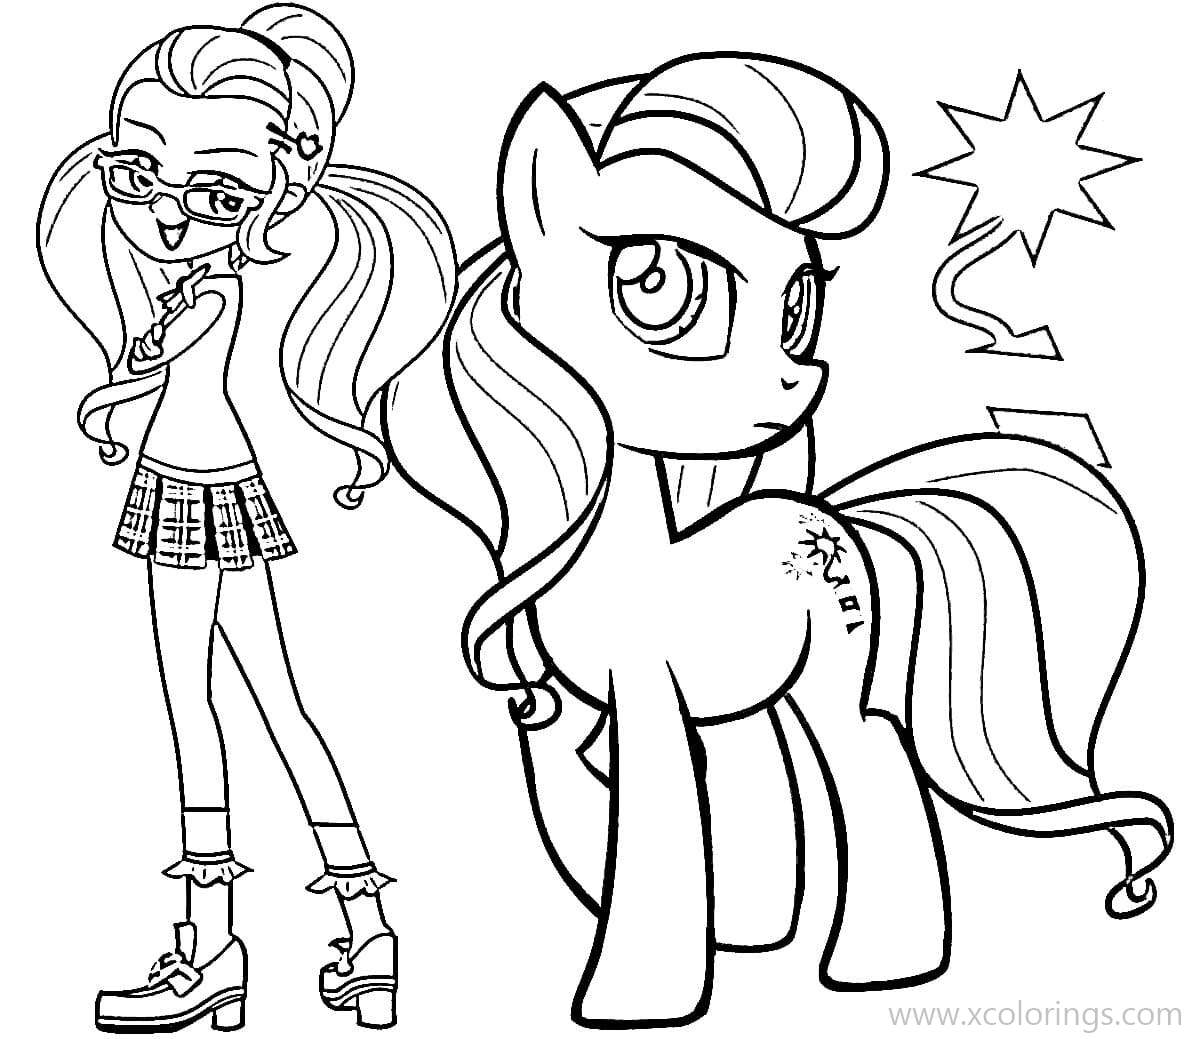 Free Equestria Girls Coloring Pages Sugarcoat printable